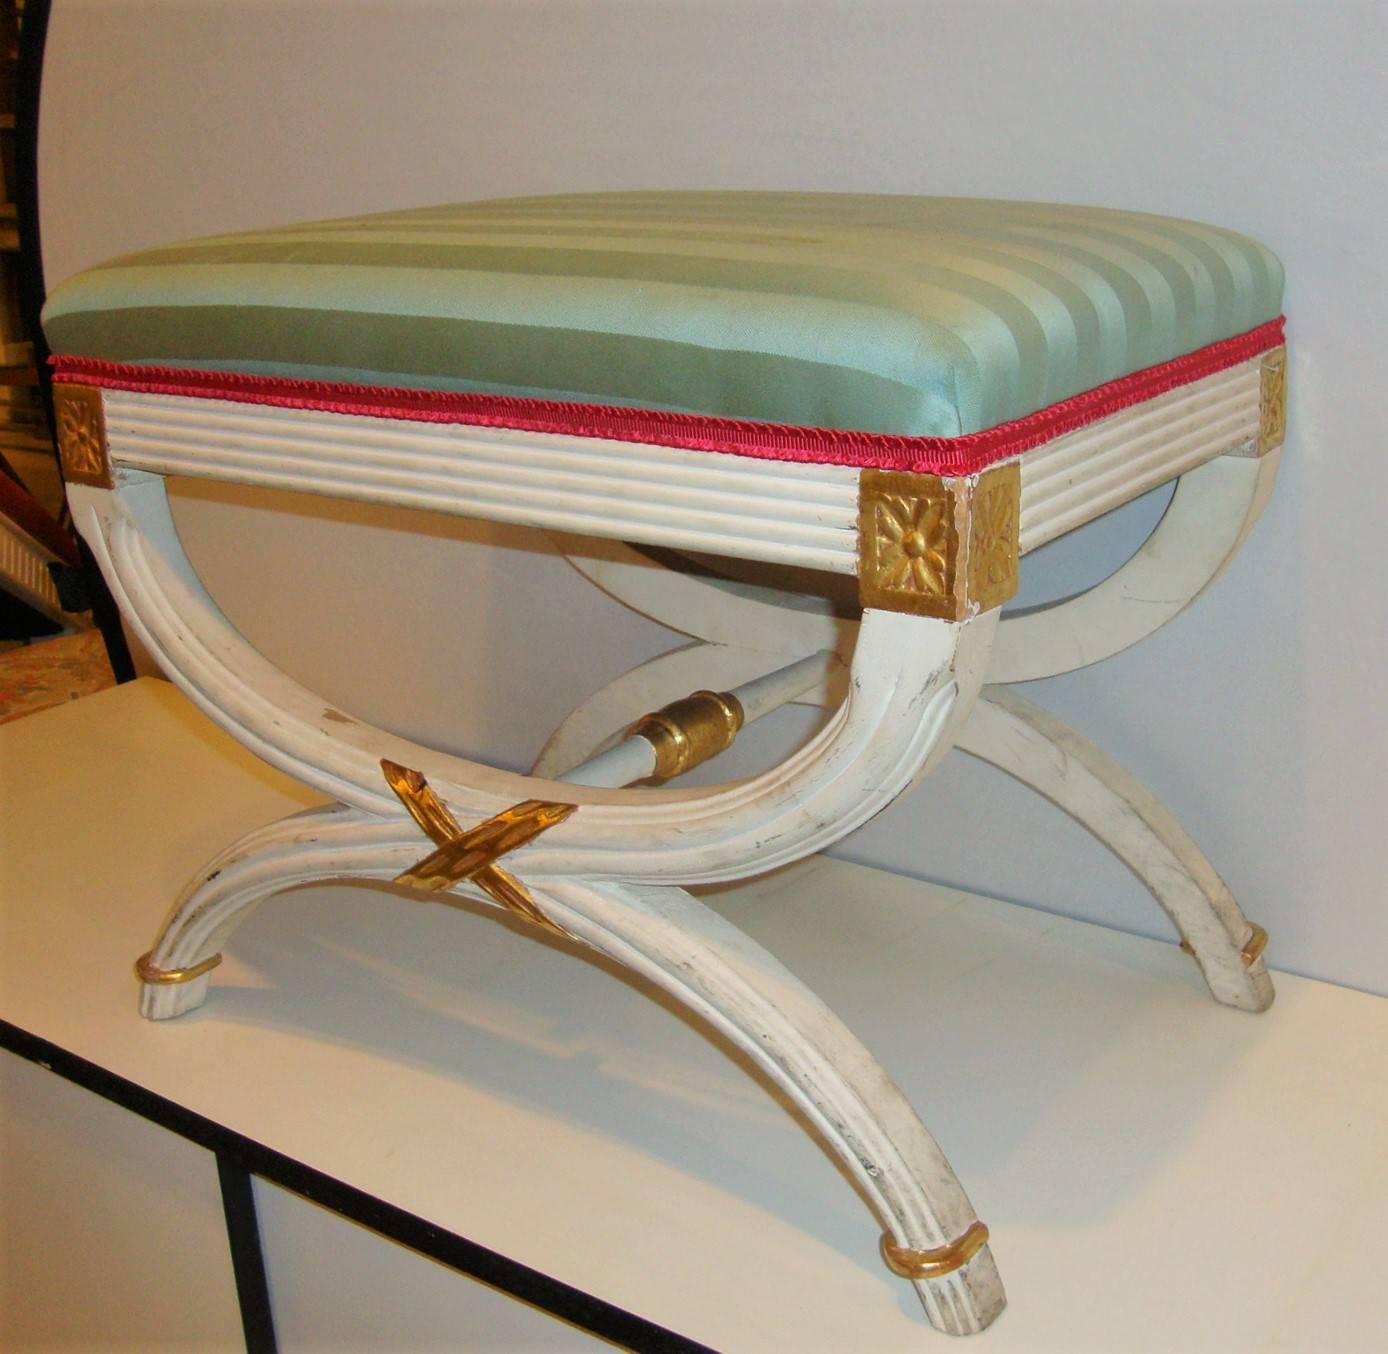 Hollywood Regency paint decorated “X” form bench or footstool. Off-white paint decorated and distressed with gilt gold hi-lights this fine decorative footstool is a prime example Hollywood Regency style.